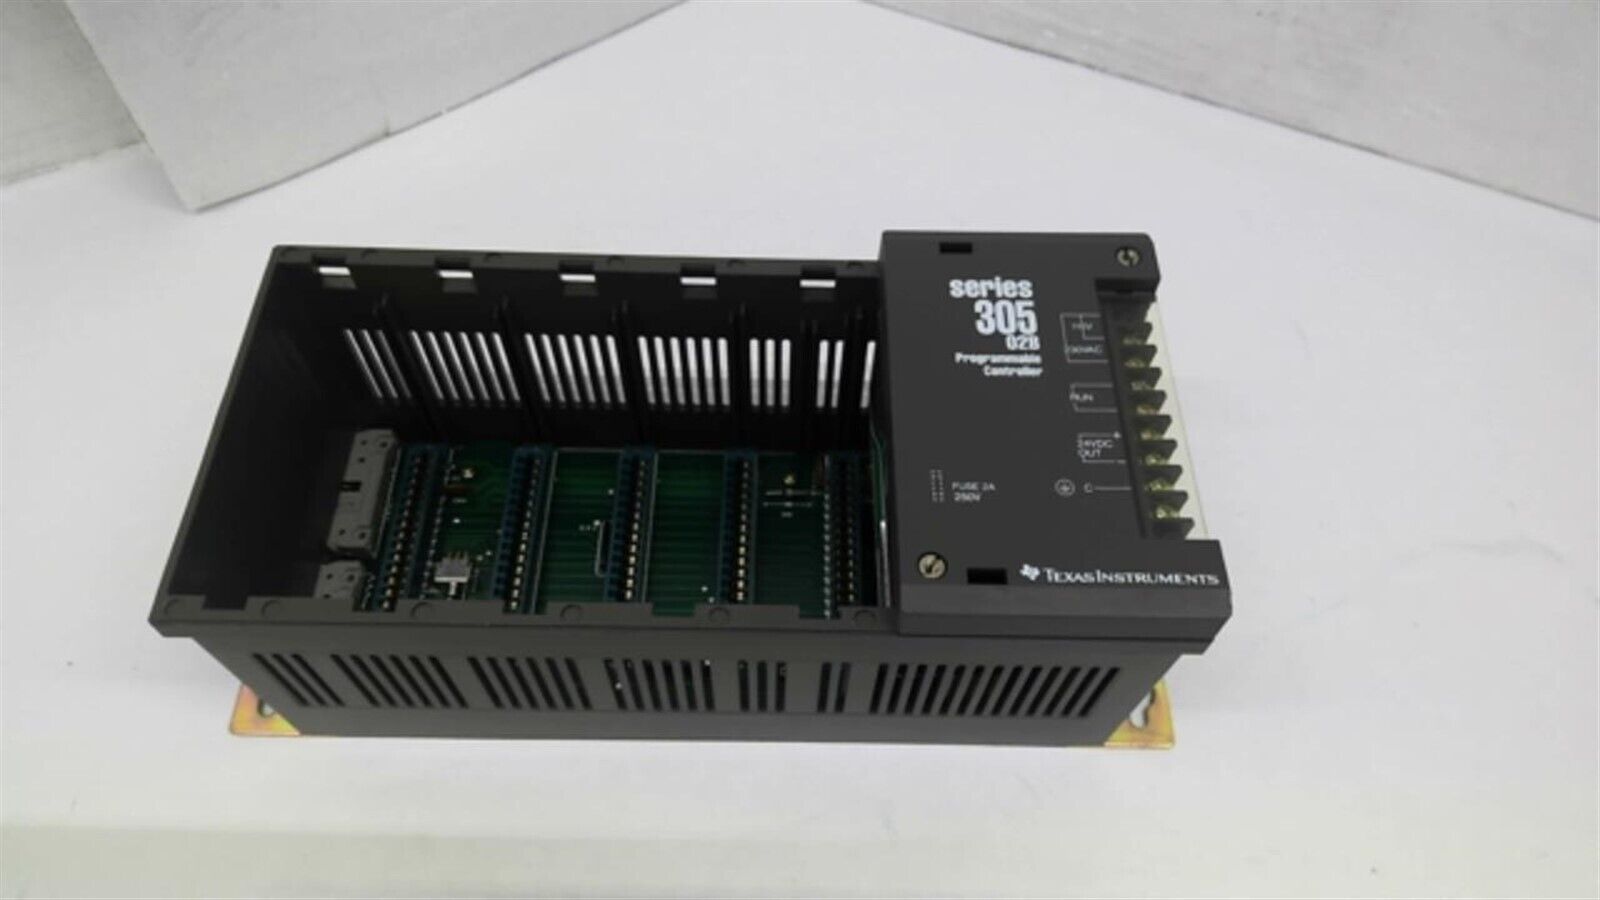 Texas Instruments Series 305B Programmable Controller 